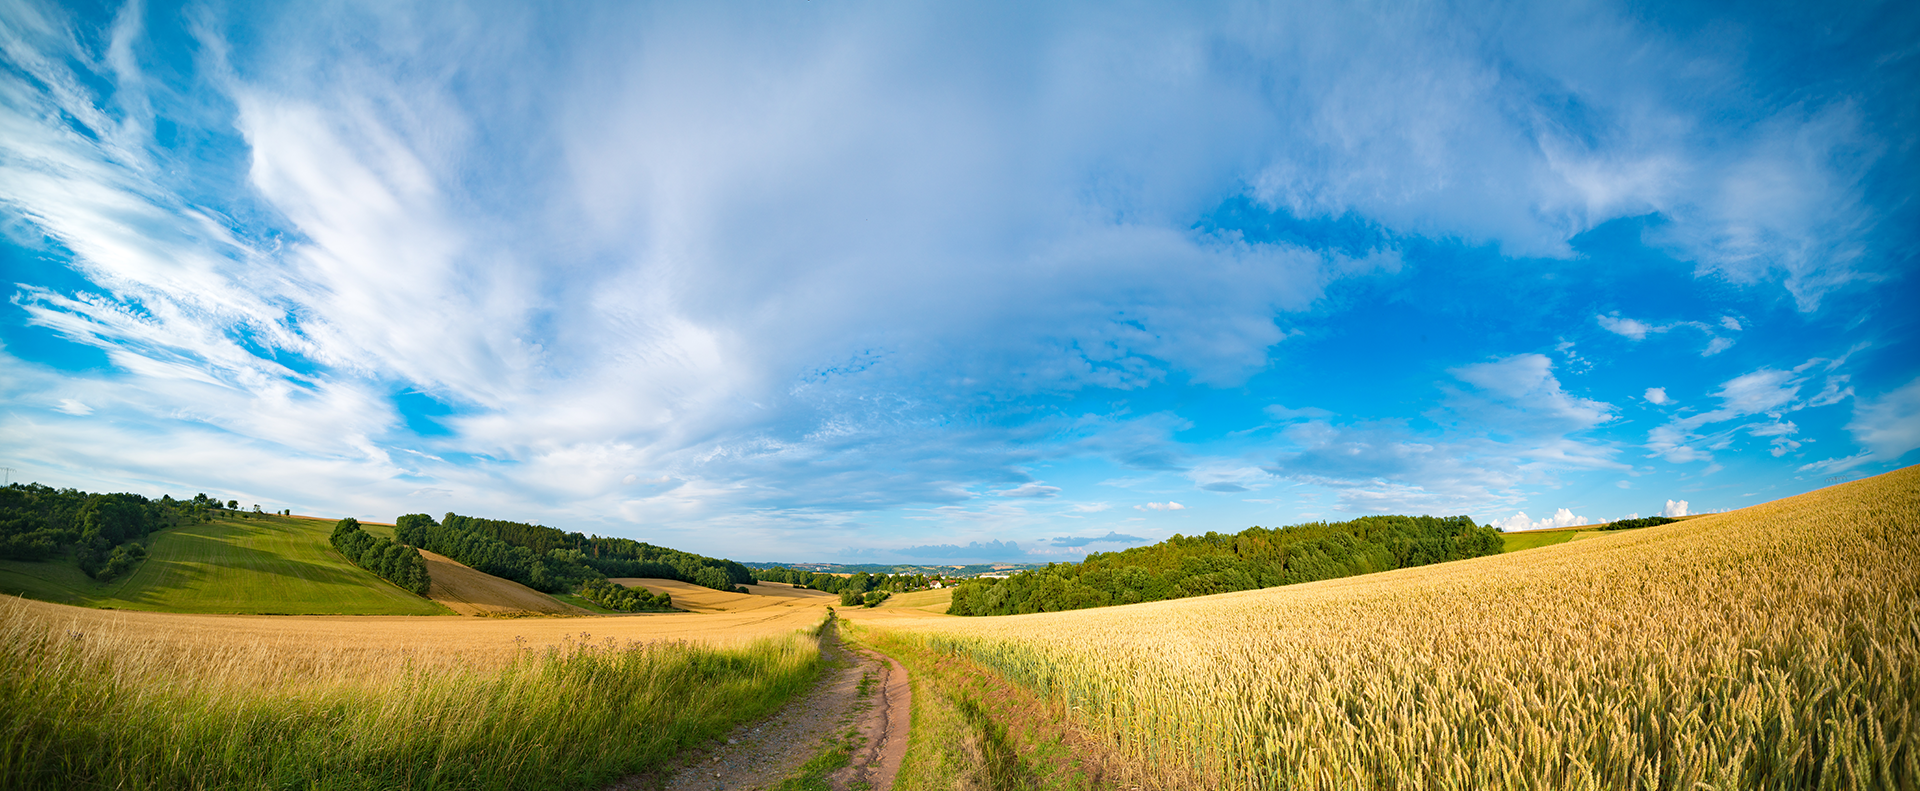 wheat field with blue sky